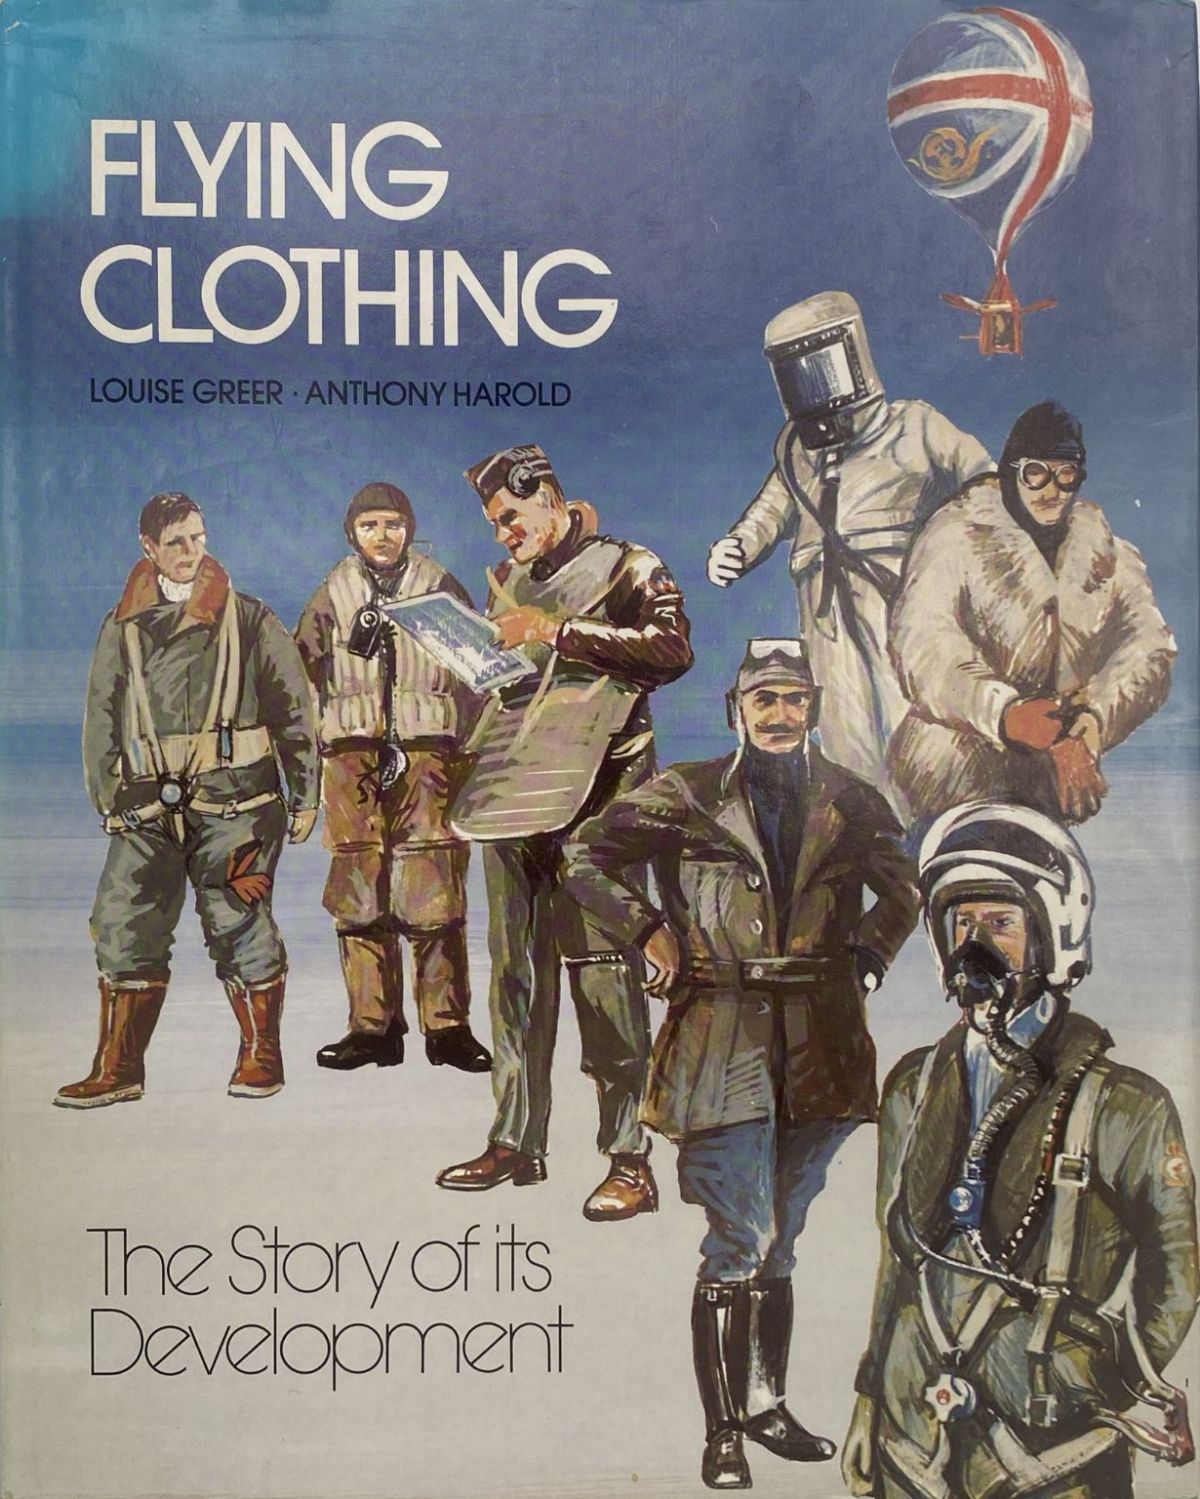 FLYING CLOTHING: The Story of its Development